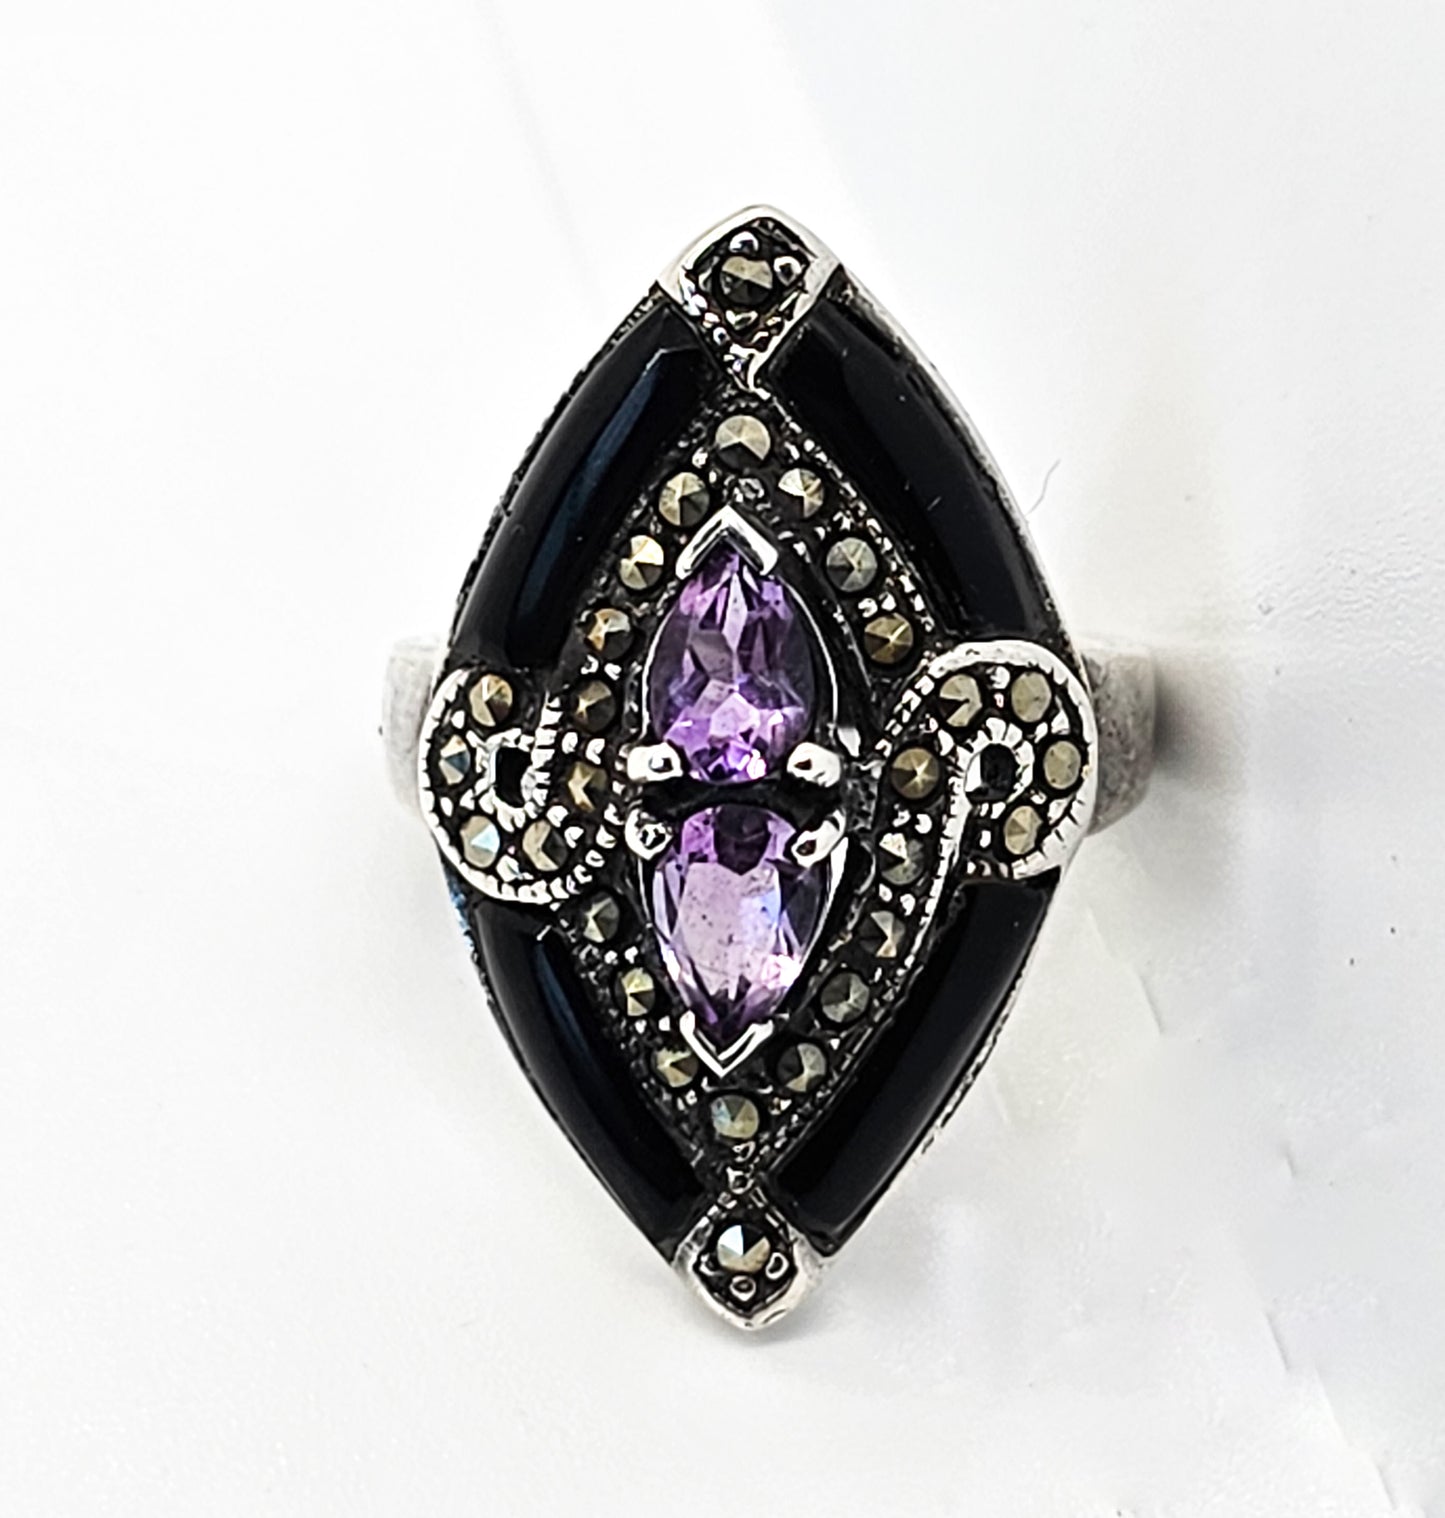 NF Onyx and marcasite large amethyst sterling silver statement ring size 6